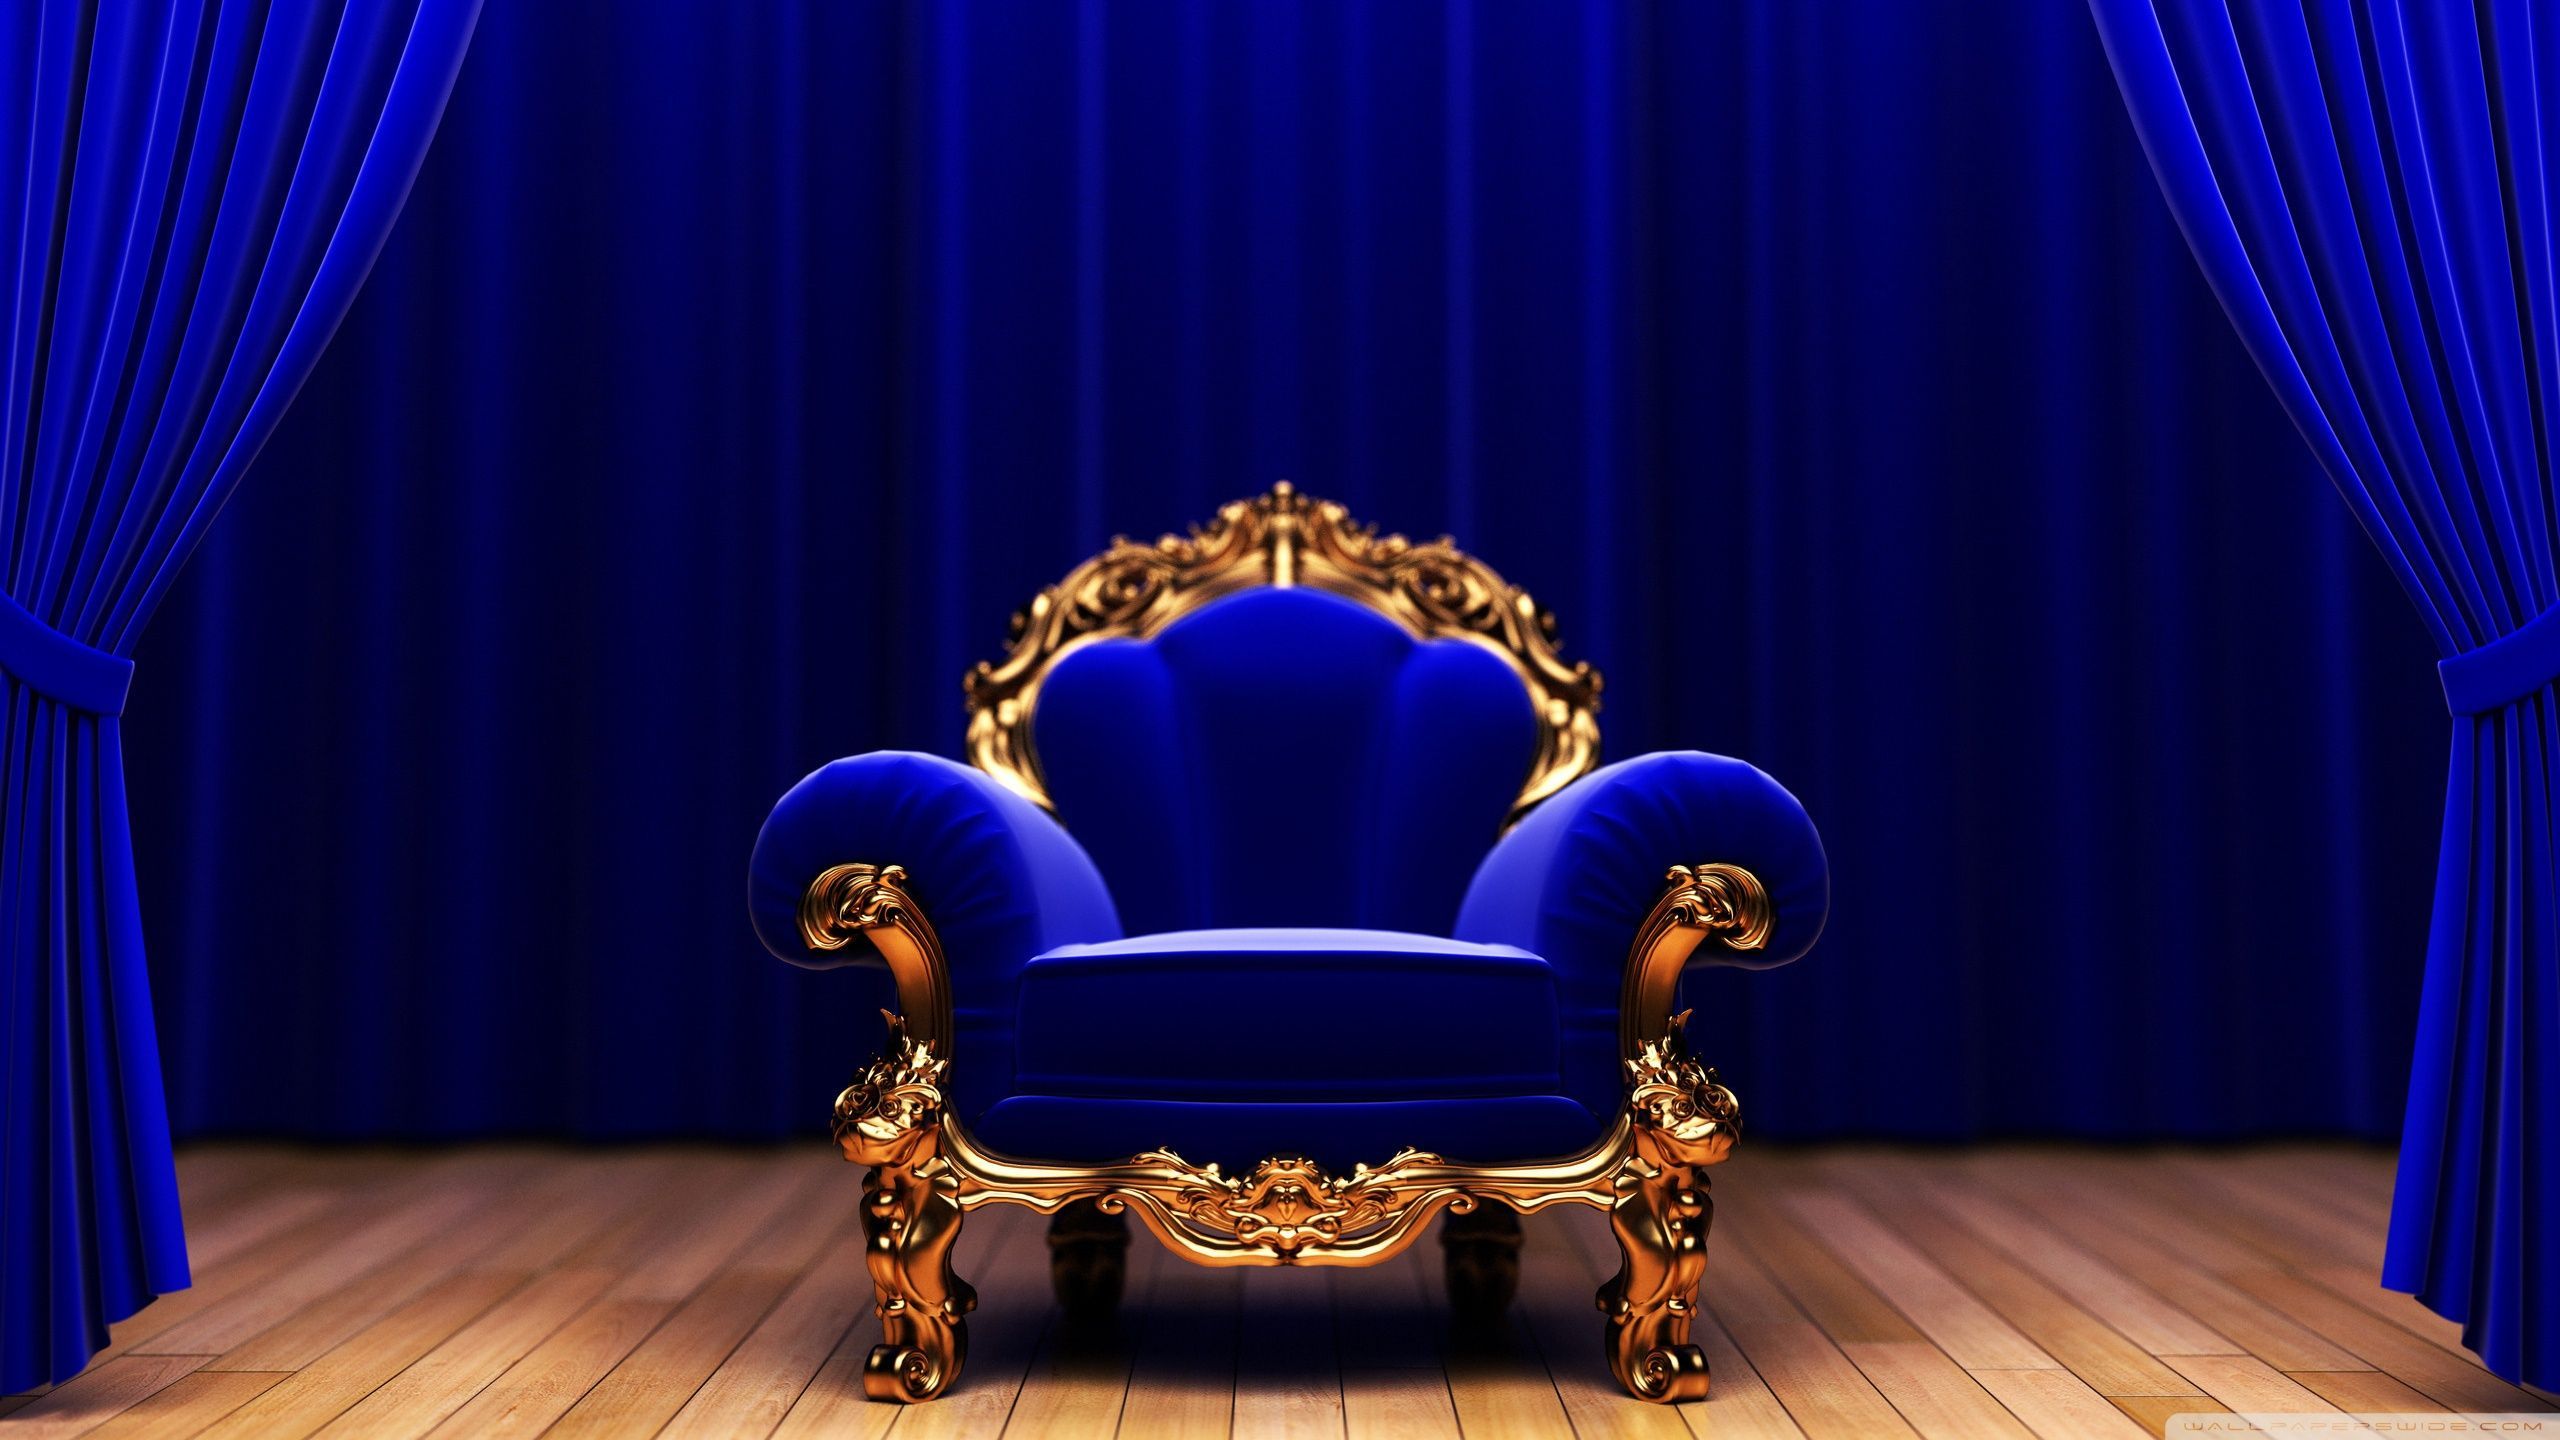 King Chair Wallpaper Free King Chair Background